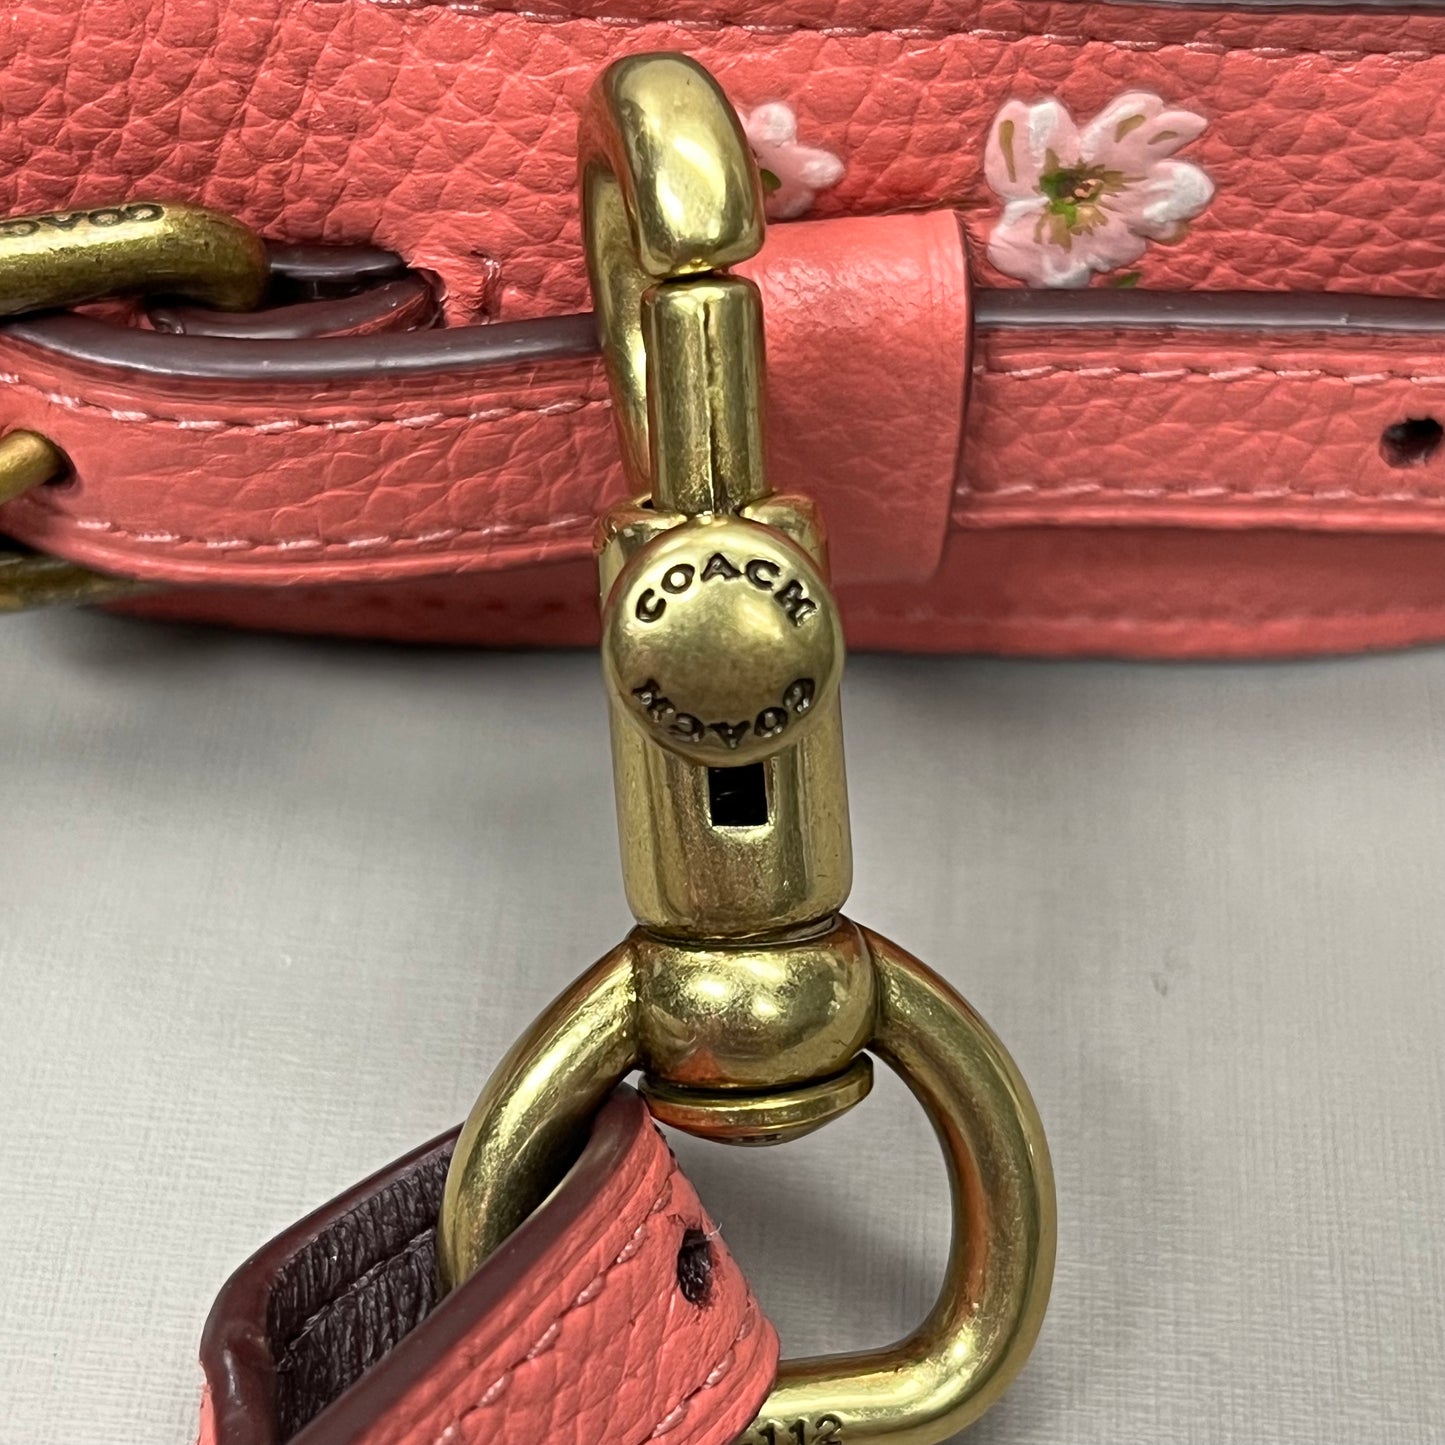 COACH Floral Print Strap Bright Coral/Brass 55506 (New)